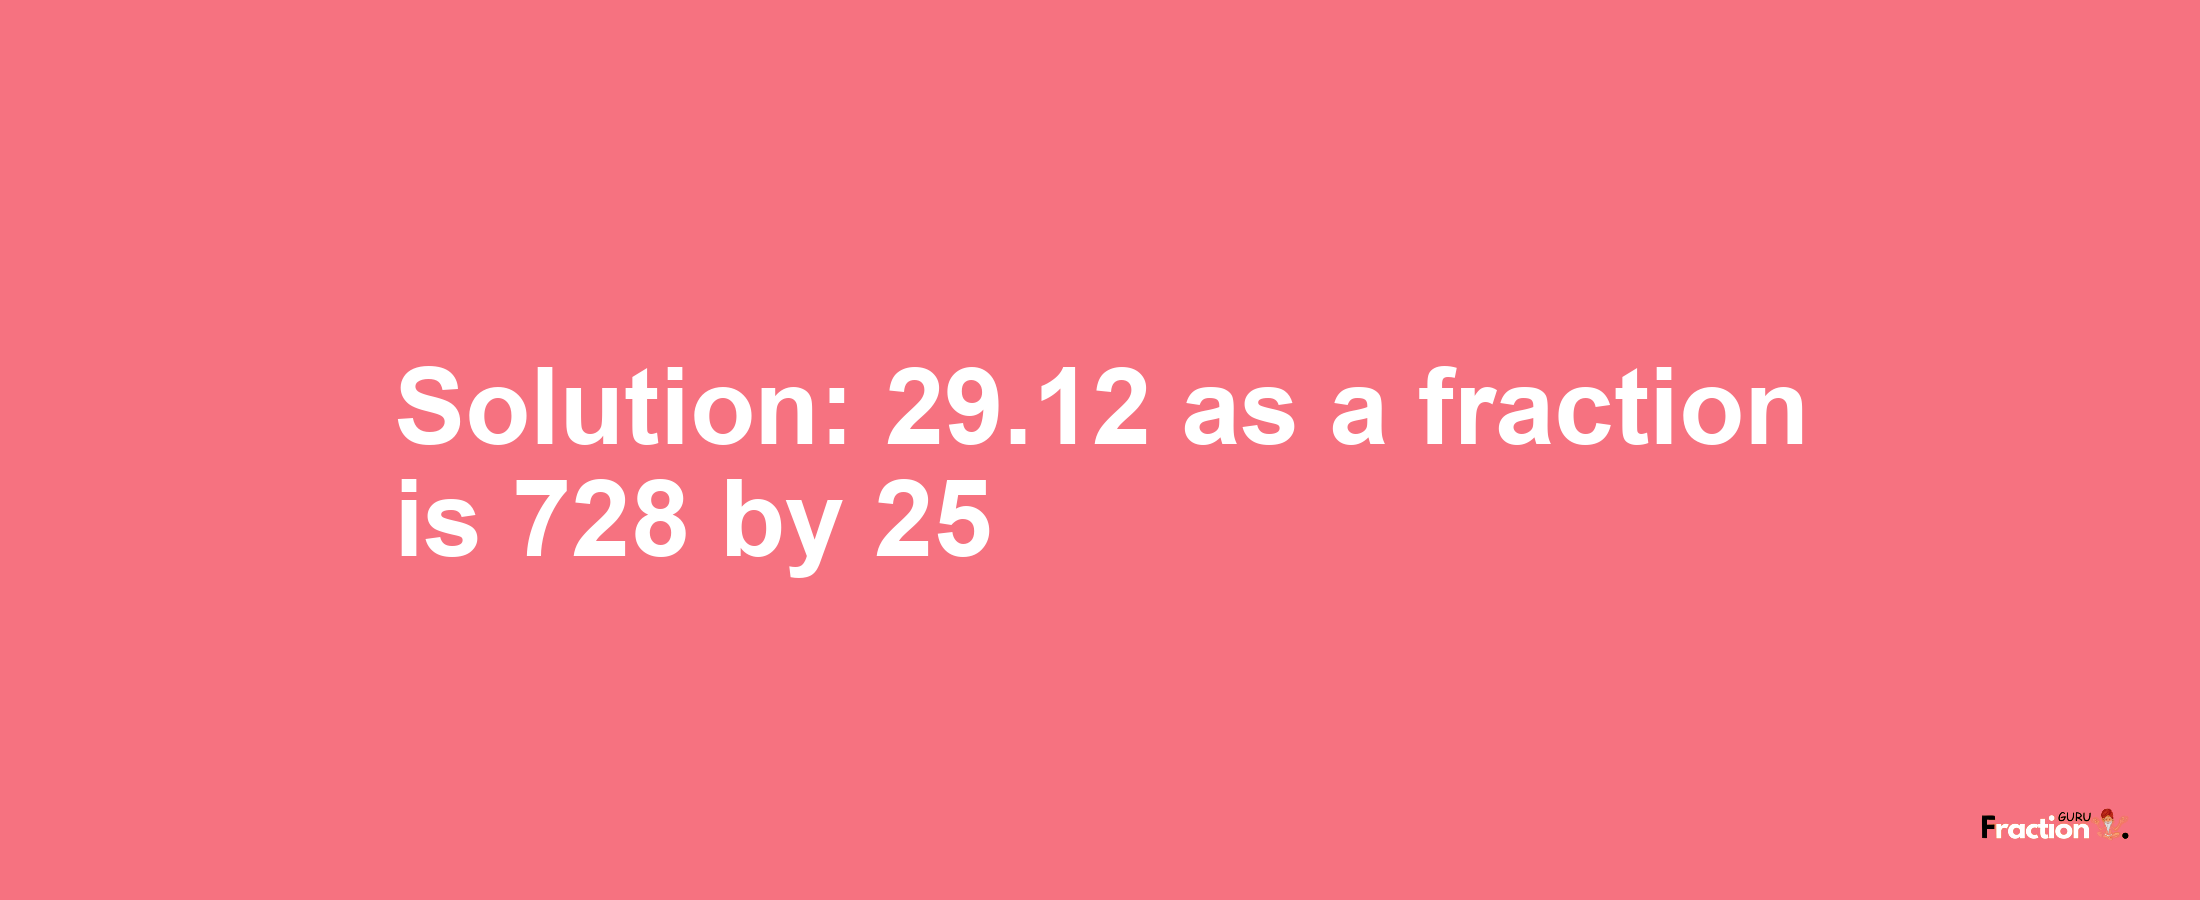 Solution:29.12 as a fraction is 728/25